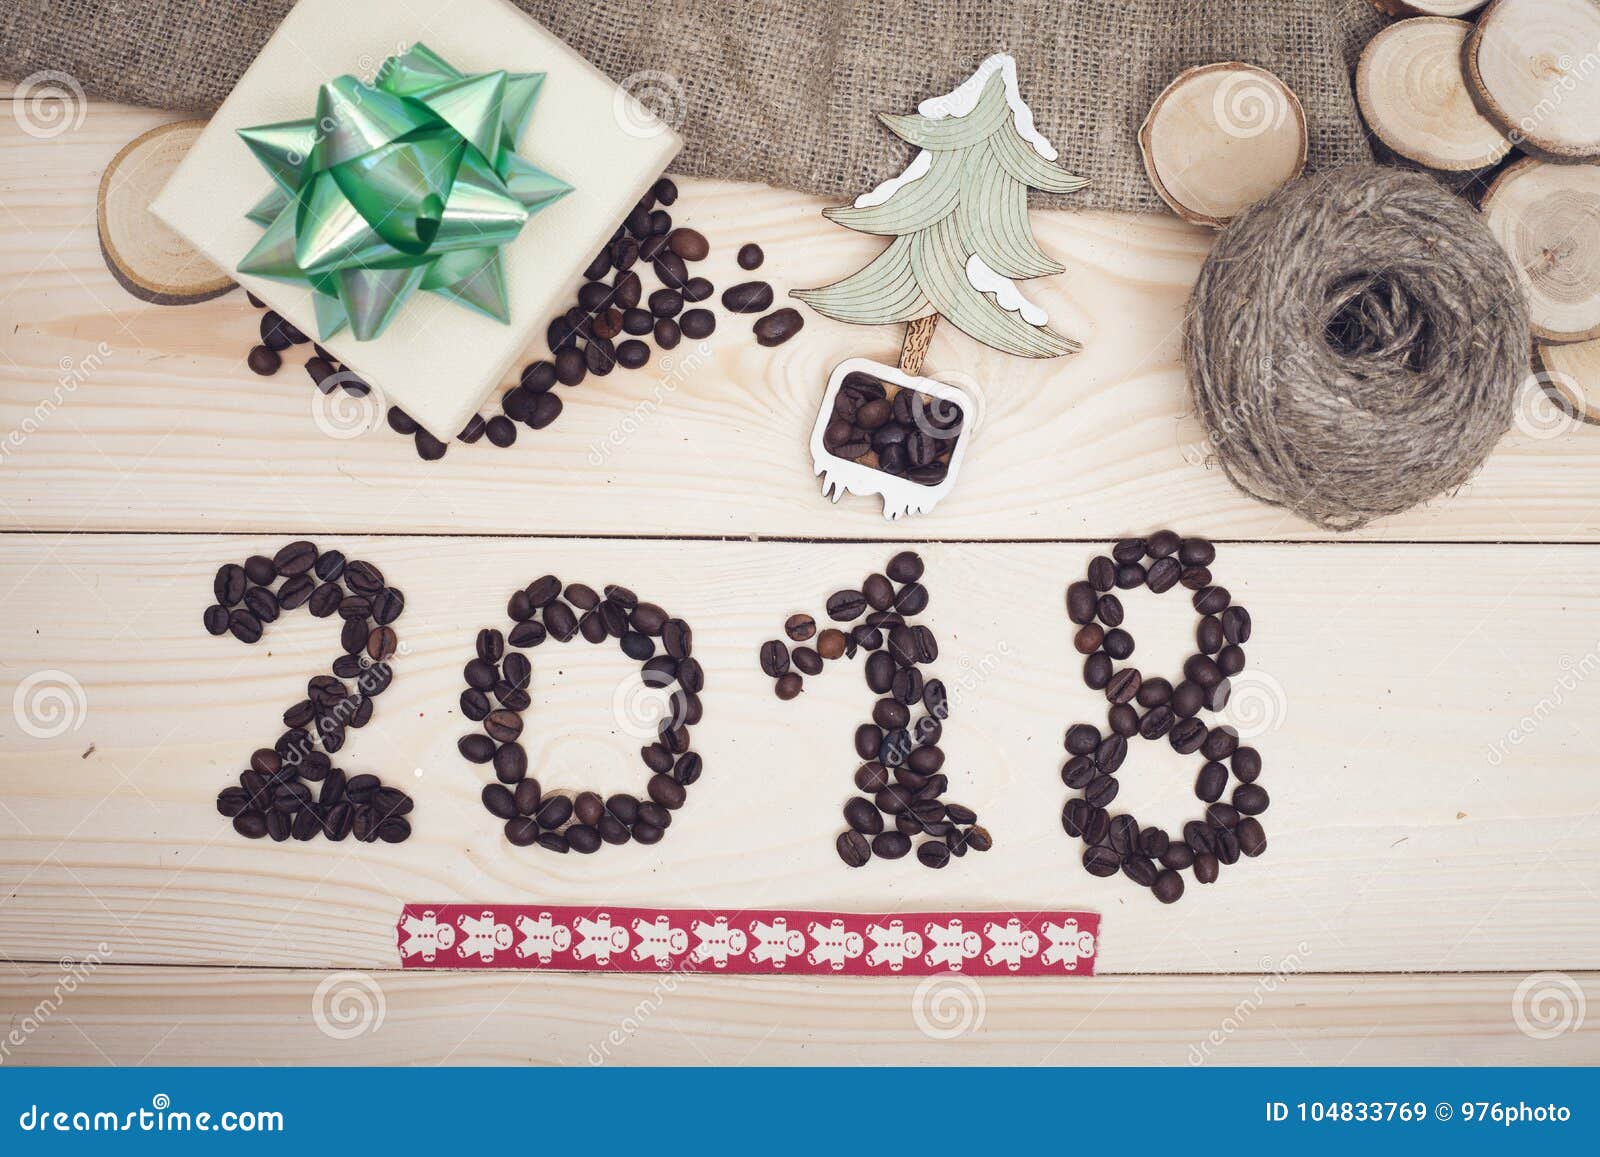 2018 Coffee Beans Inscription,a Toy Christmas Tree, A Gift Box And A